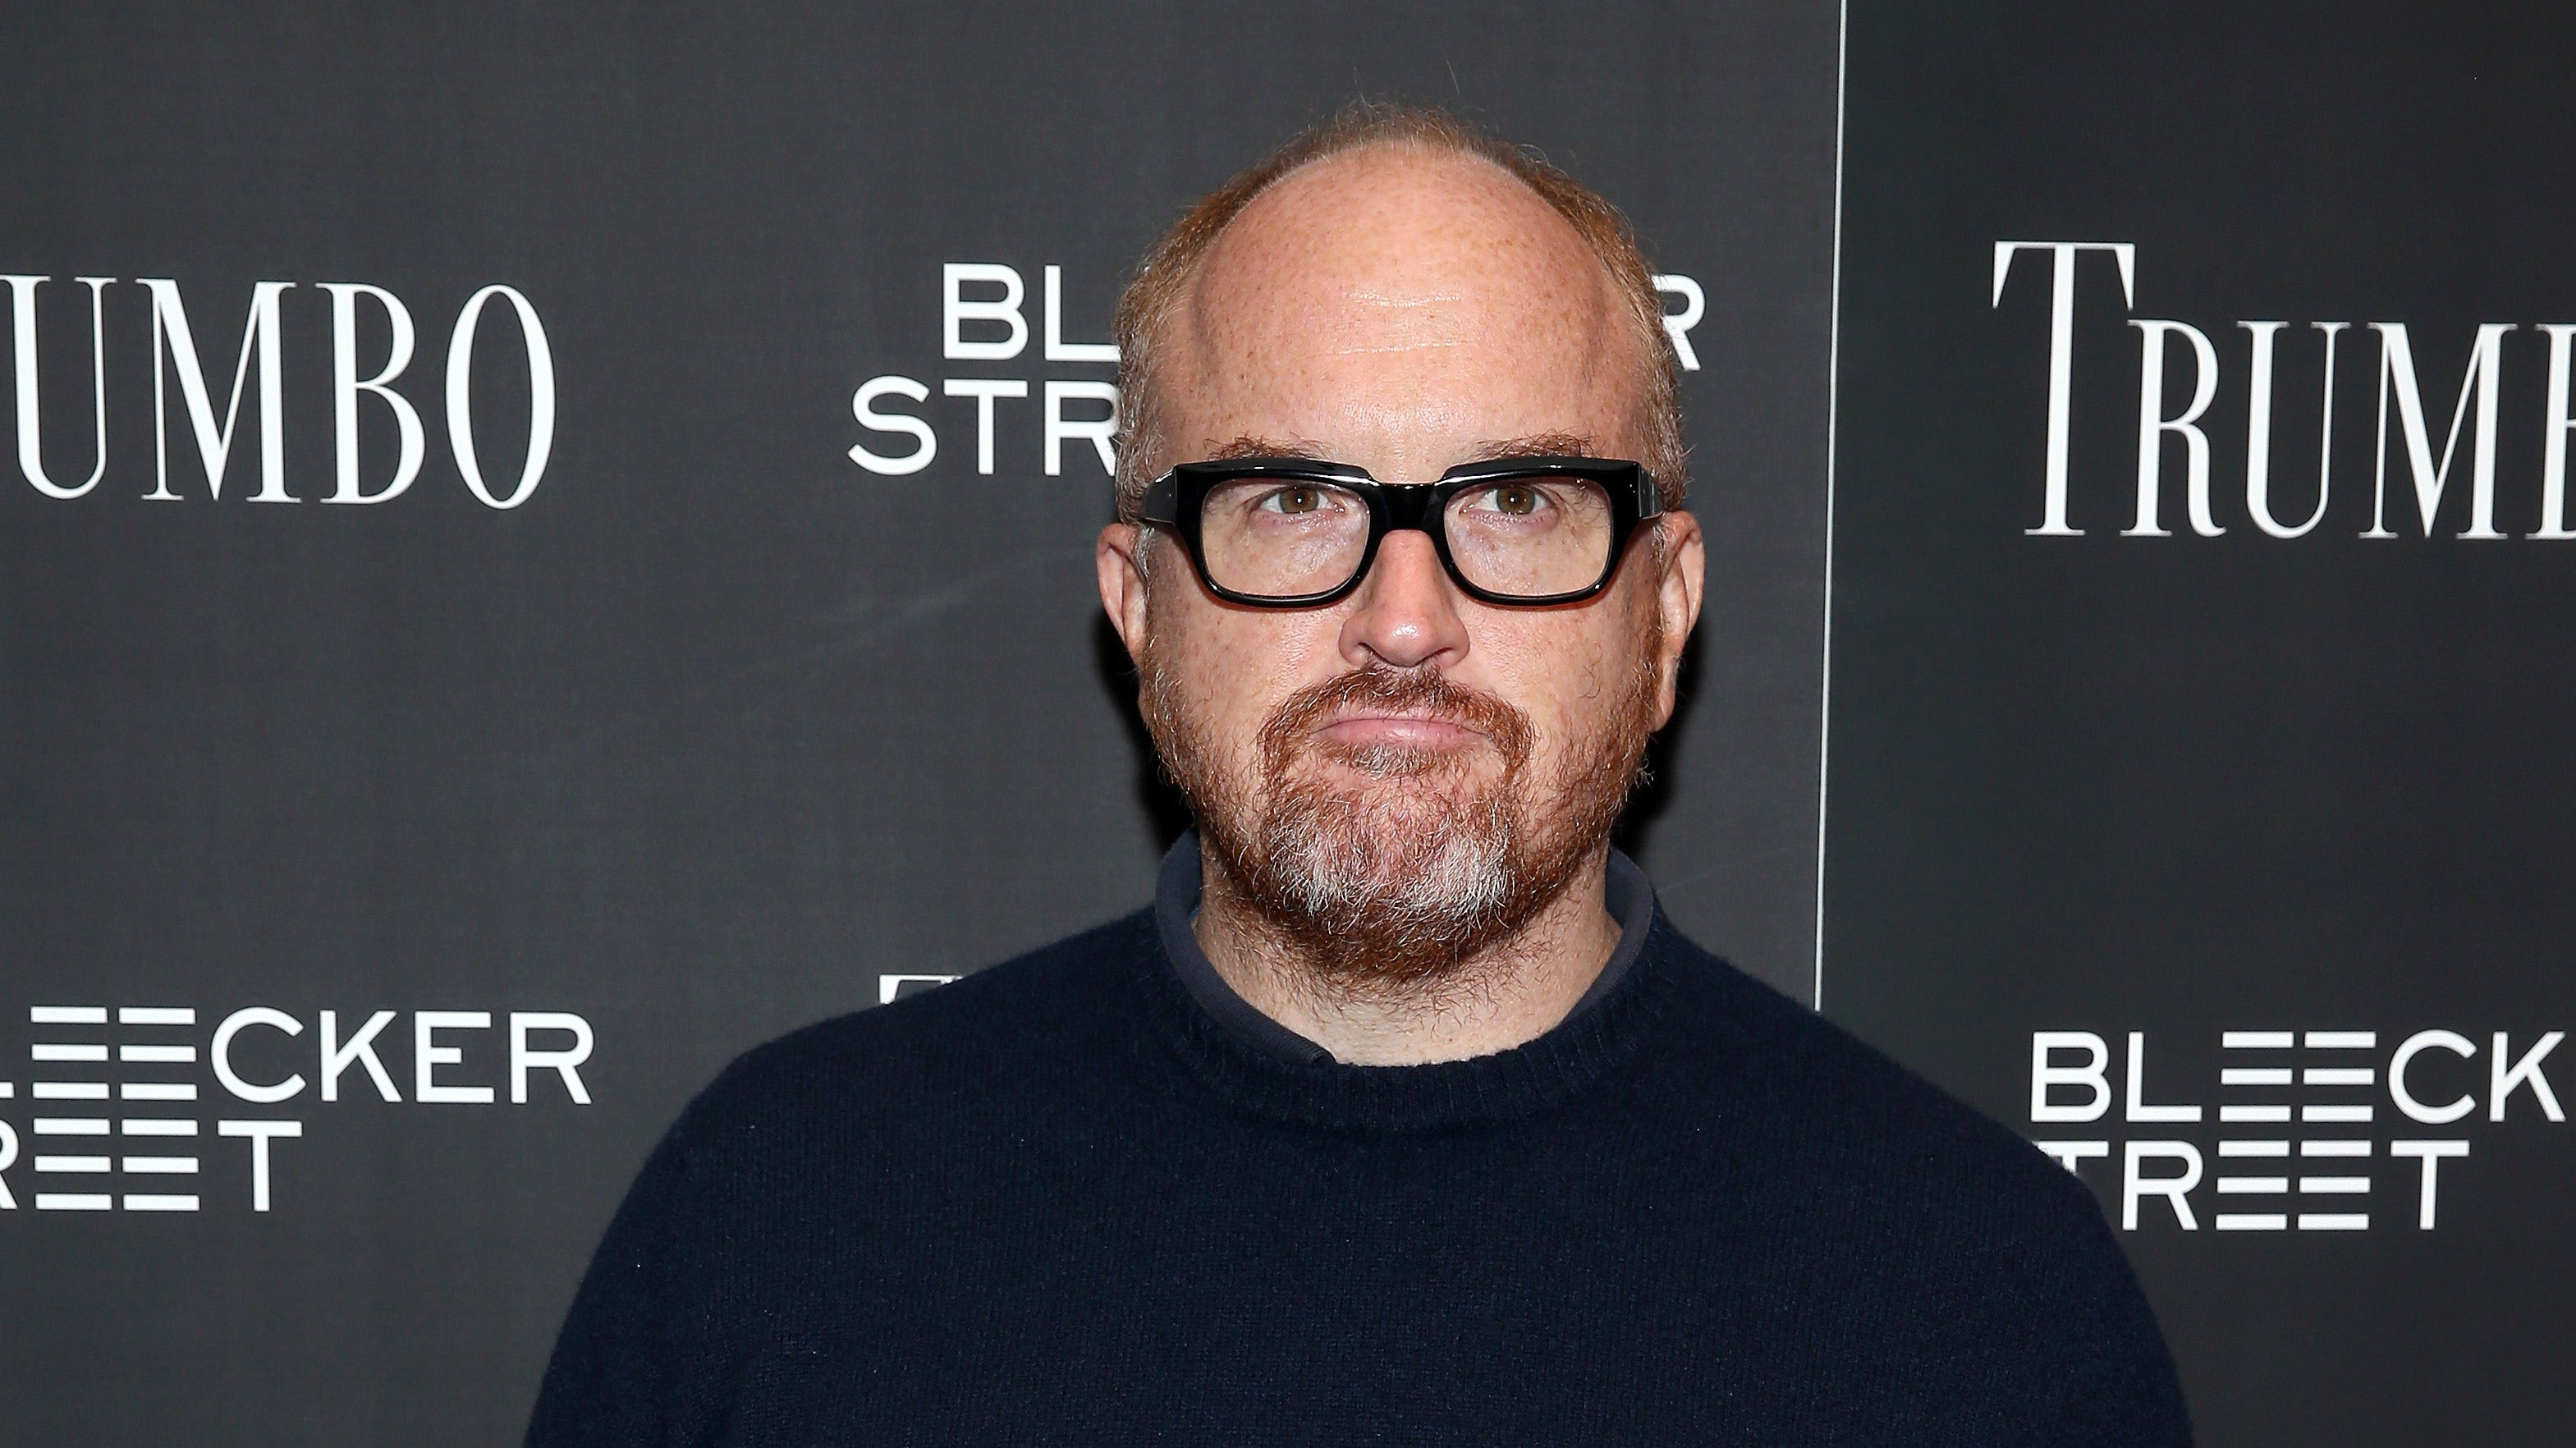 FOX NEWS: Louis C.K. to Israeli audience: ‘I’d rather be in Auschwitz than NYC’